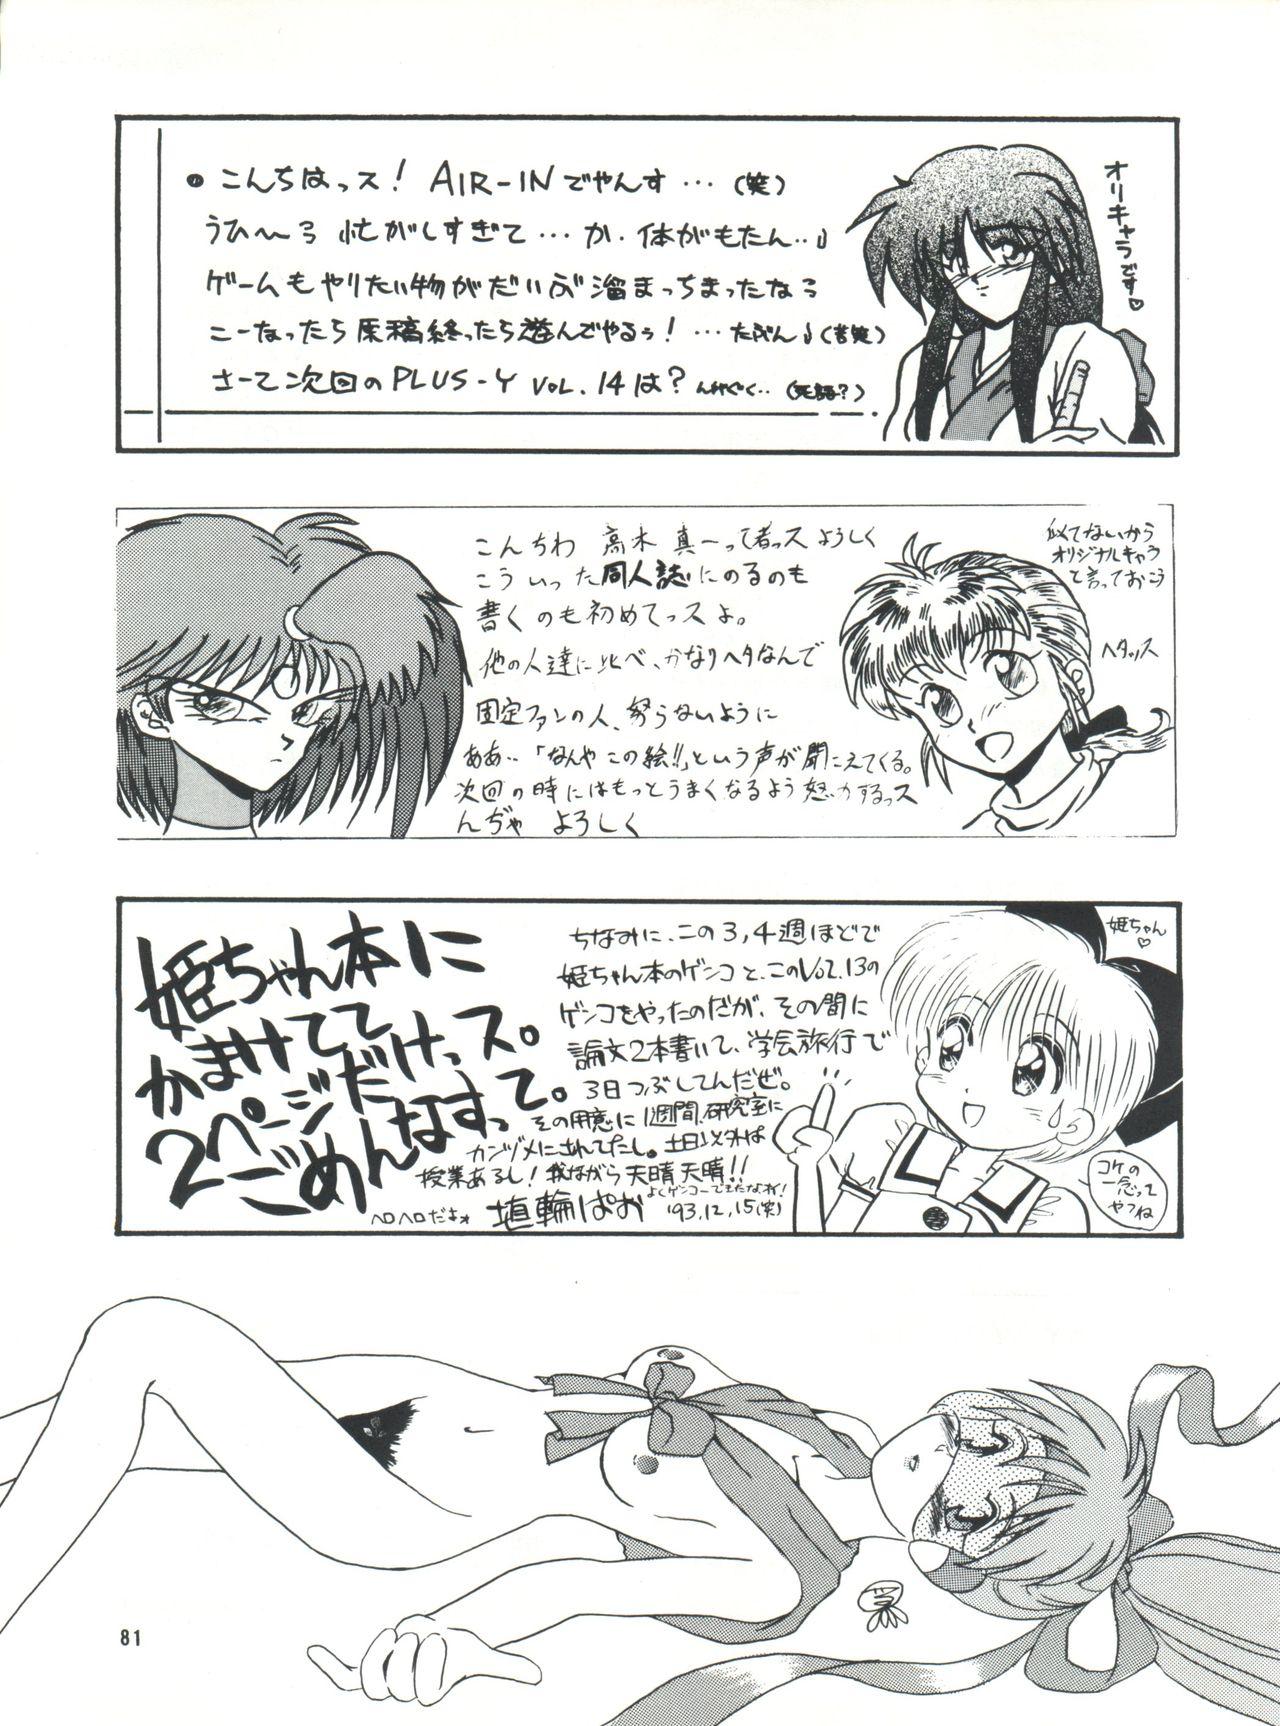 Glory Hole PLUS-Y Vol. 13 - Sailor moon Ah my goddess Tenchi muyo Ghost sweeper mikami Brave express might gaine Future gpx cyber formula Muka muka paradise Foda - Page 82